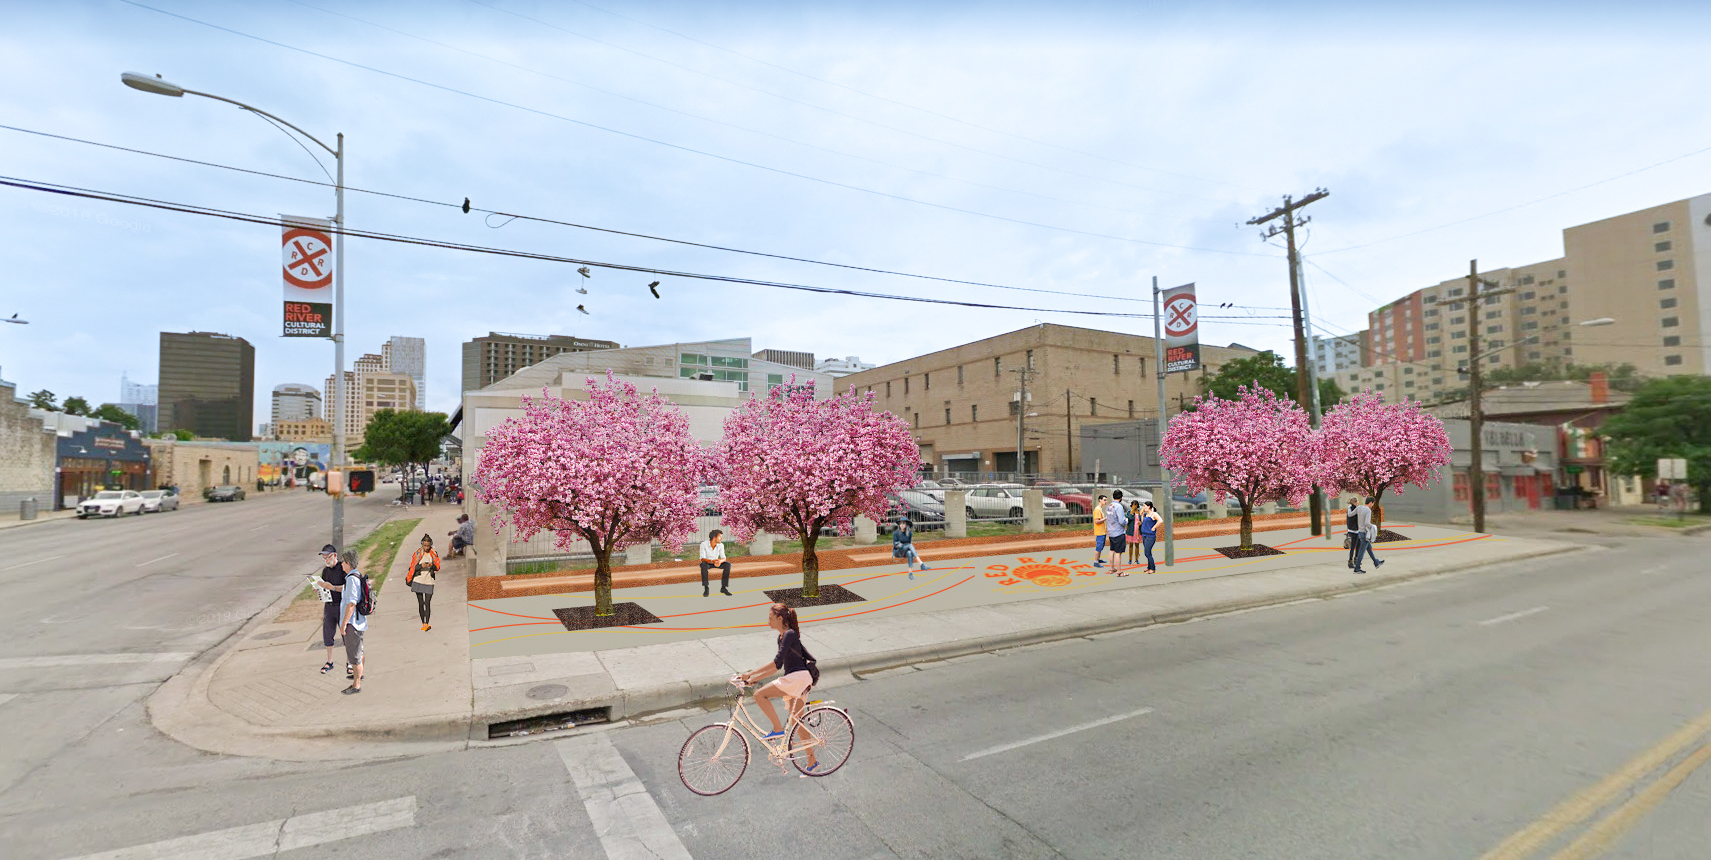 Photo rendering of proposed 7th Street Plaza at the NW corner of the 7th and Red River intersection including sidewalk corrections, pedestrian lighting, planters, and landscaping.